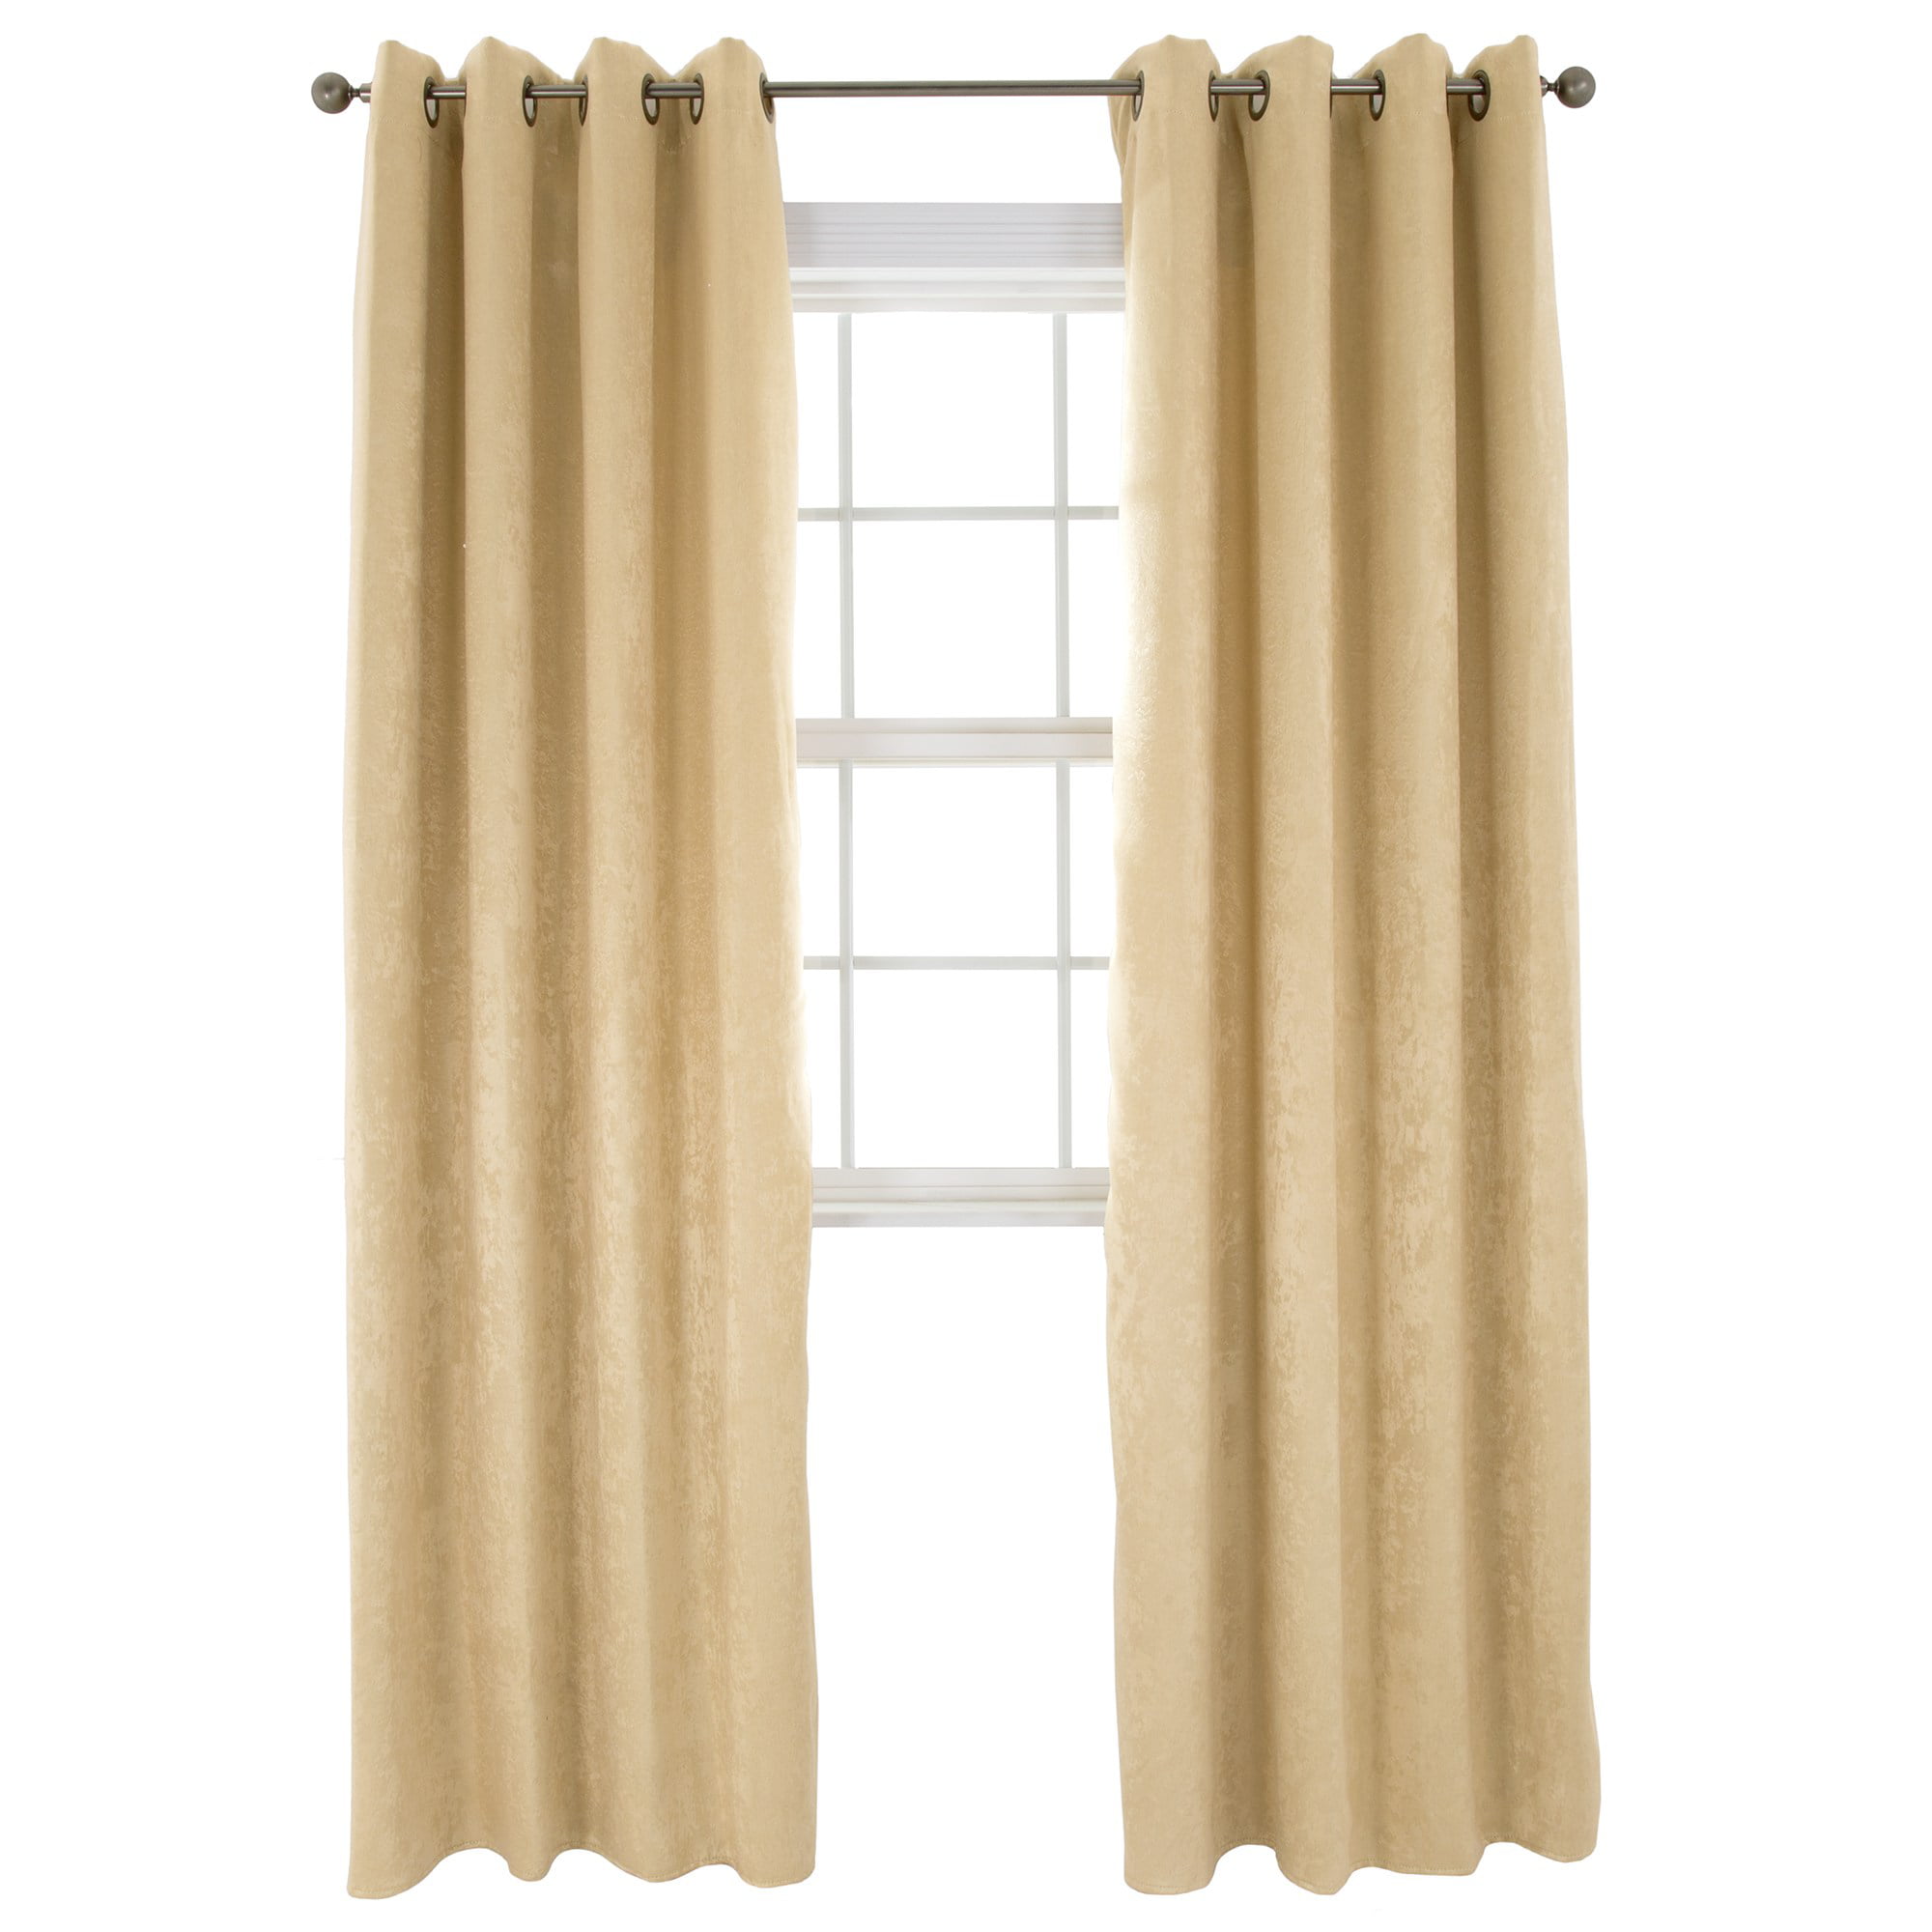 54 inch long window curtains